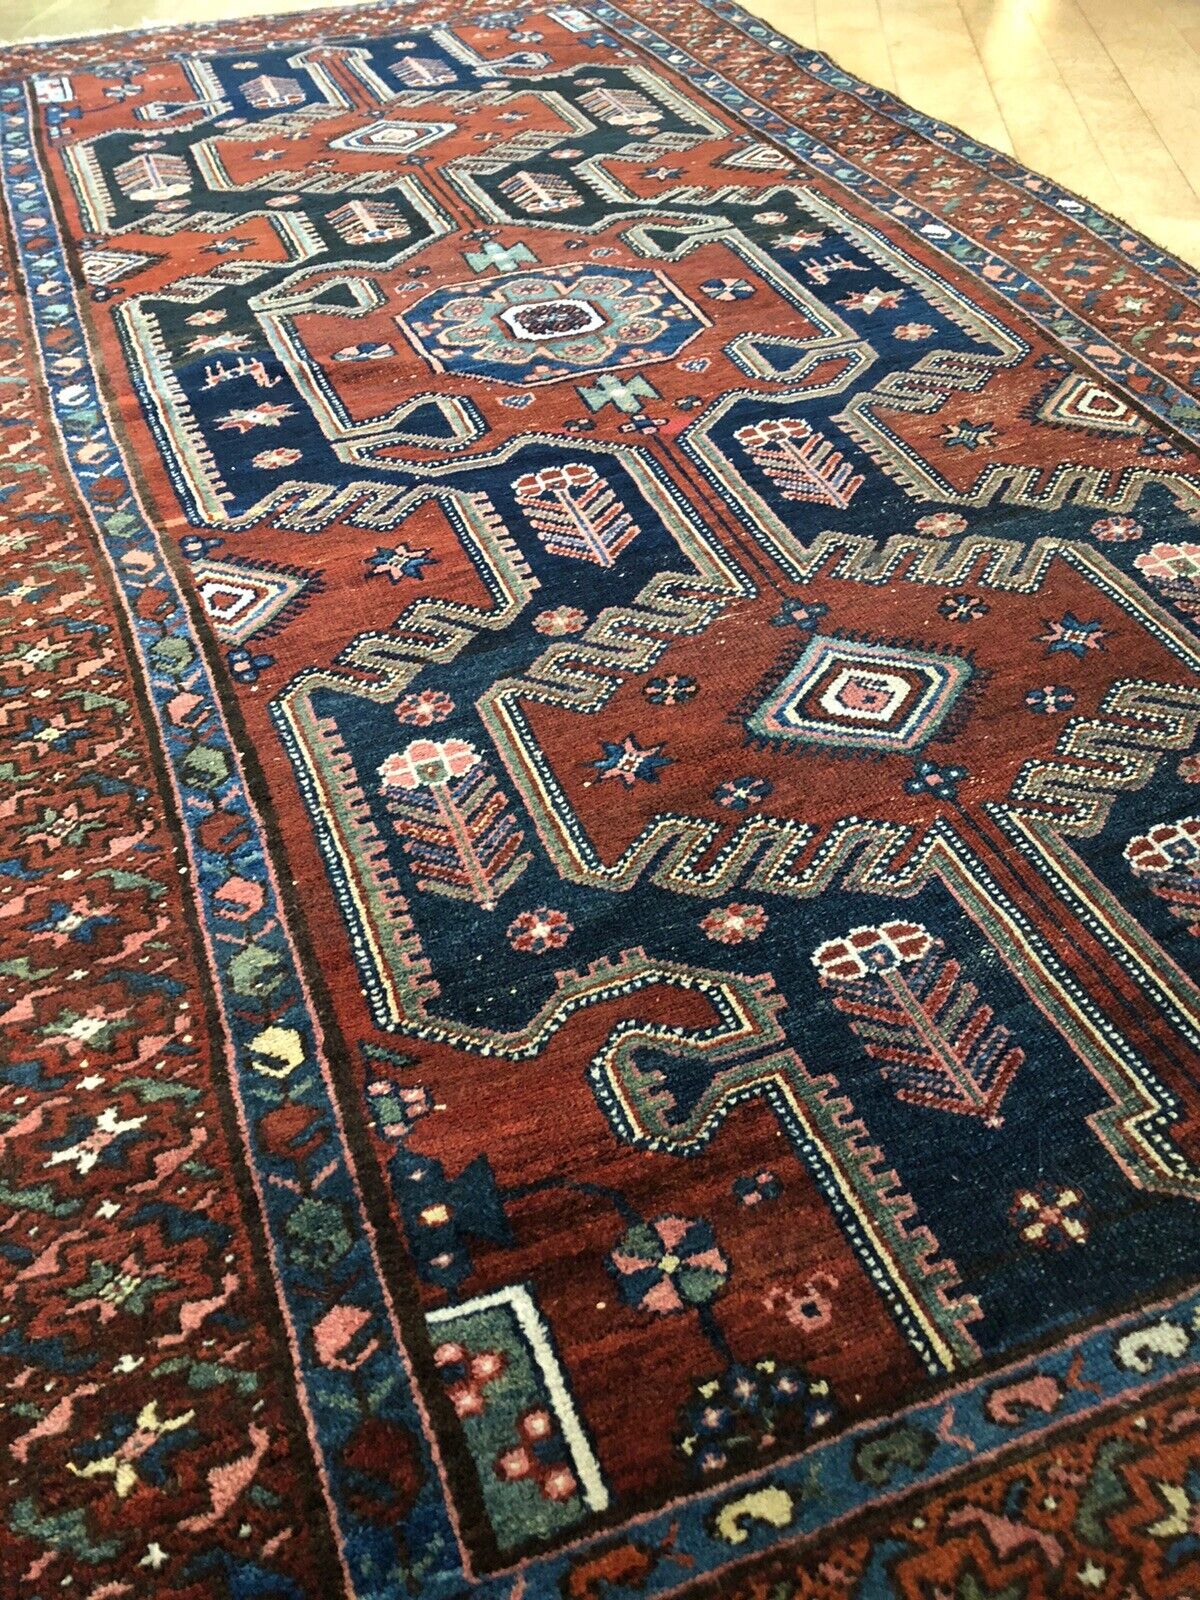 4'5"x8'2" Antique Zenjan hand-knotted wool tribal rug/ beautiful organic colors